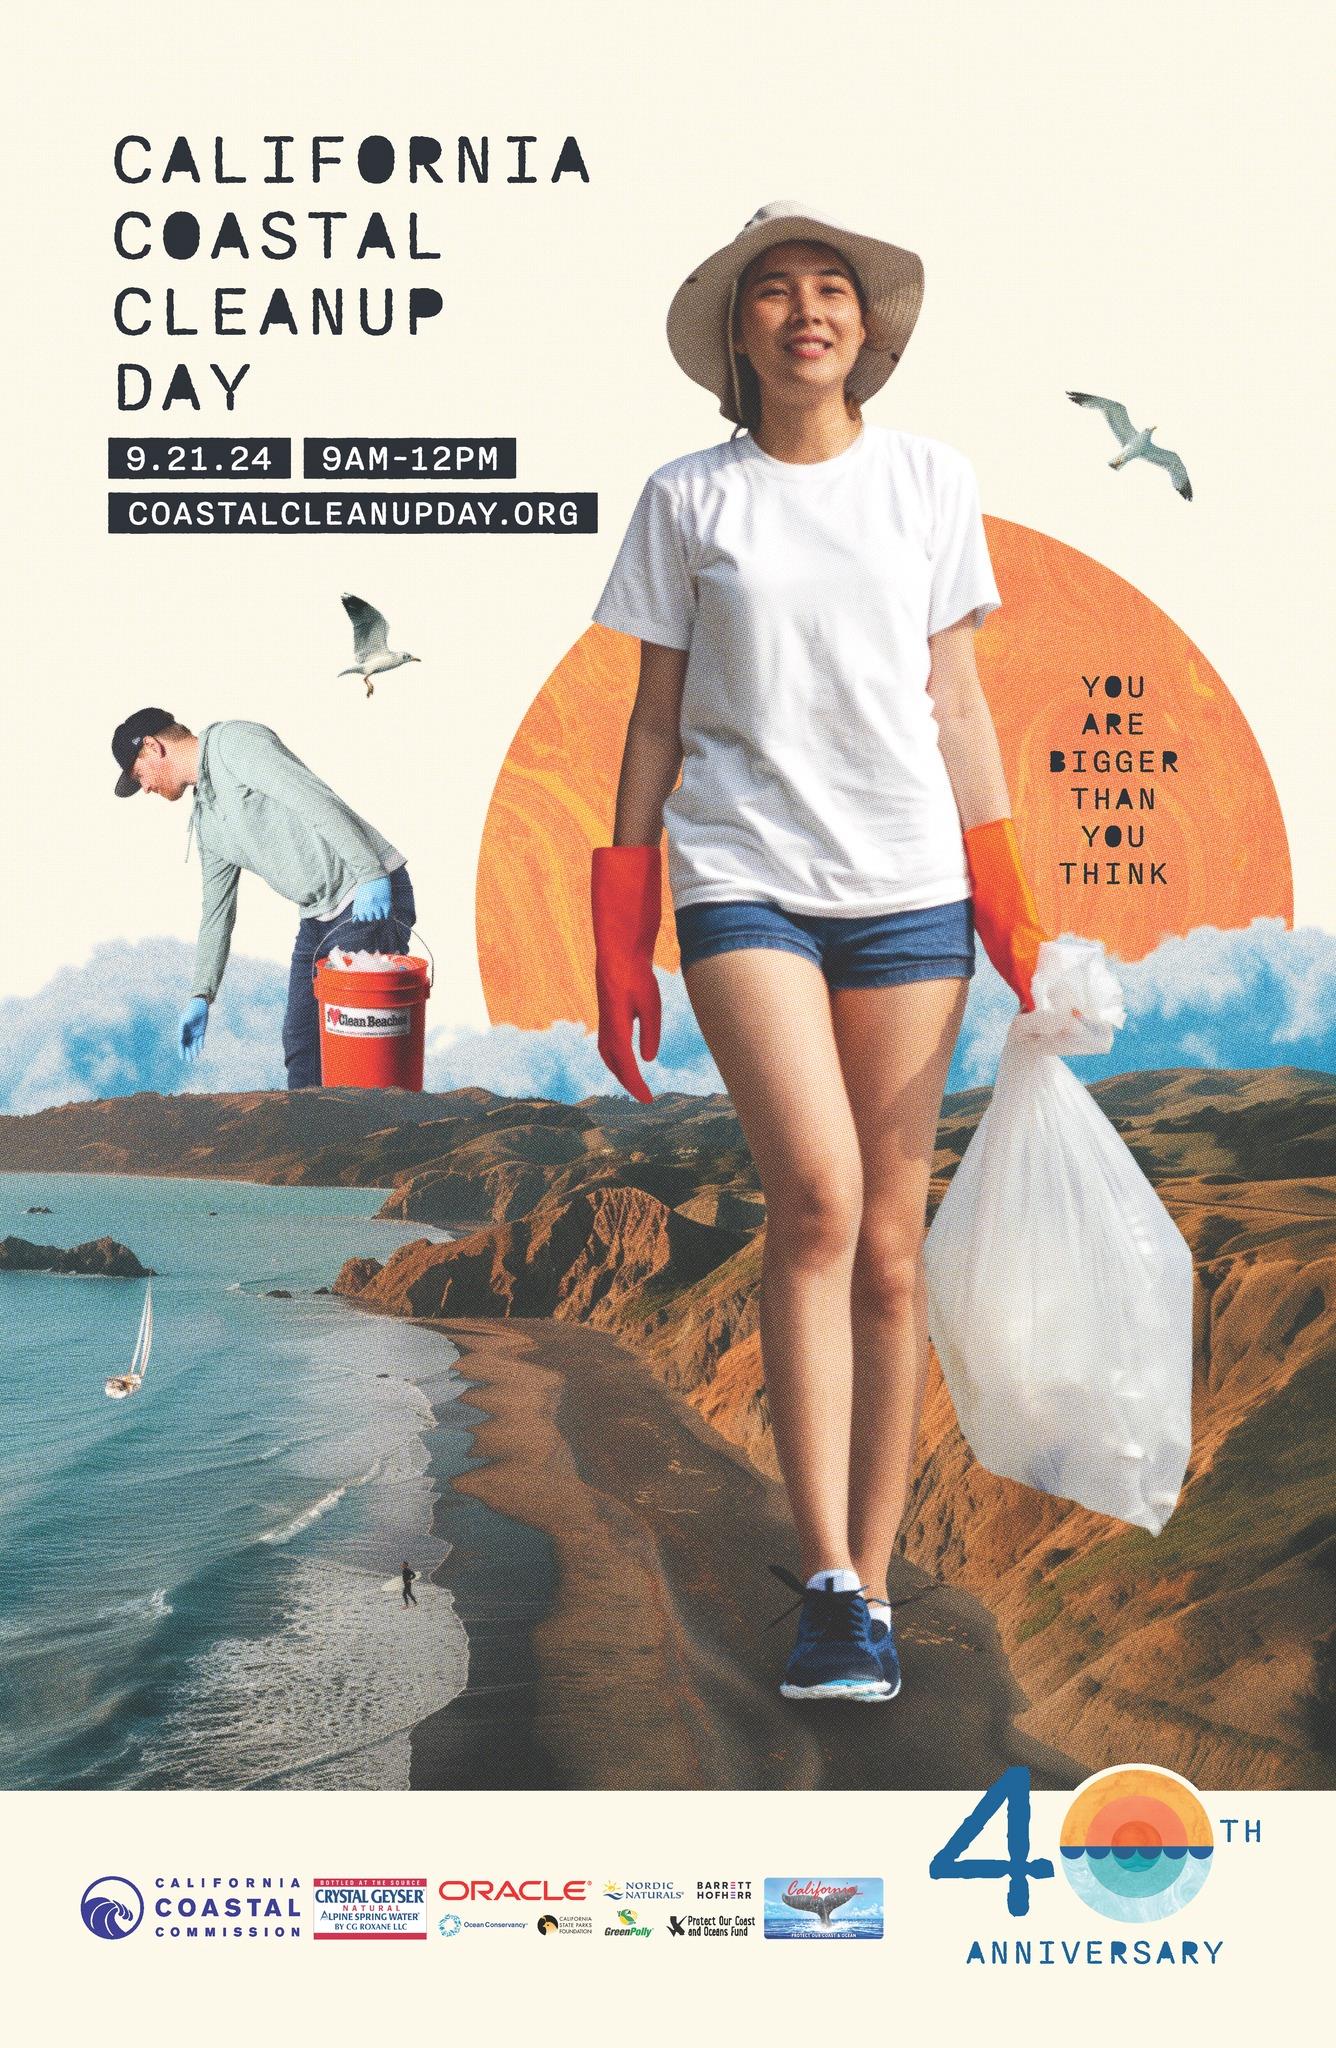 California Coastal Cleanup Day poster image. Shows 'giant' people picking up trash along the northern California coast.